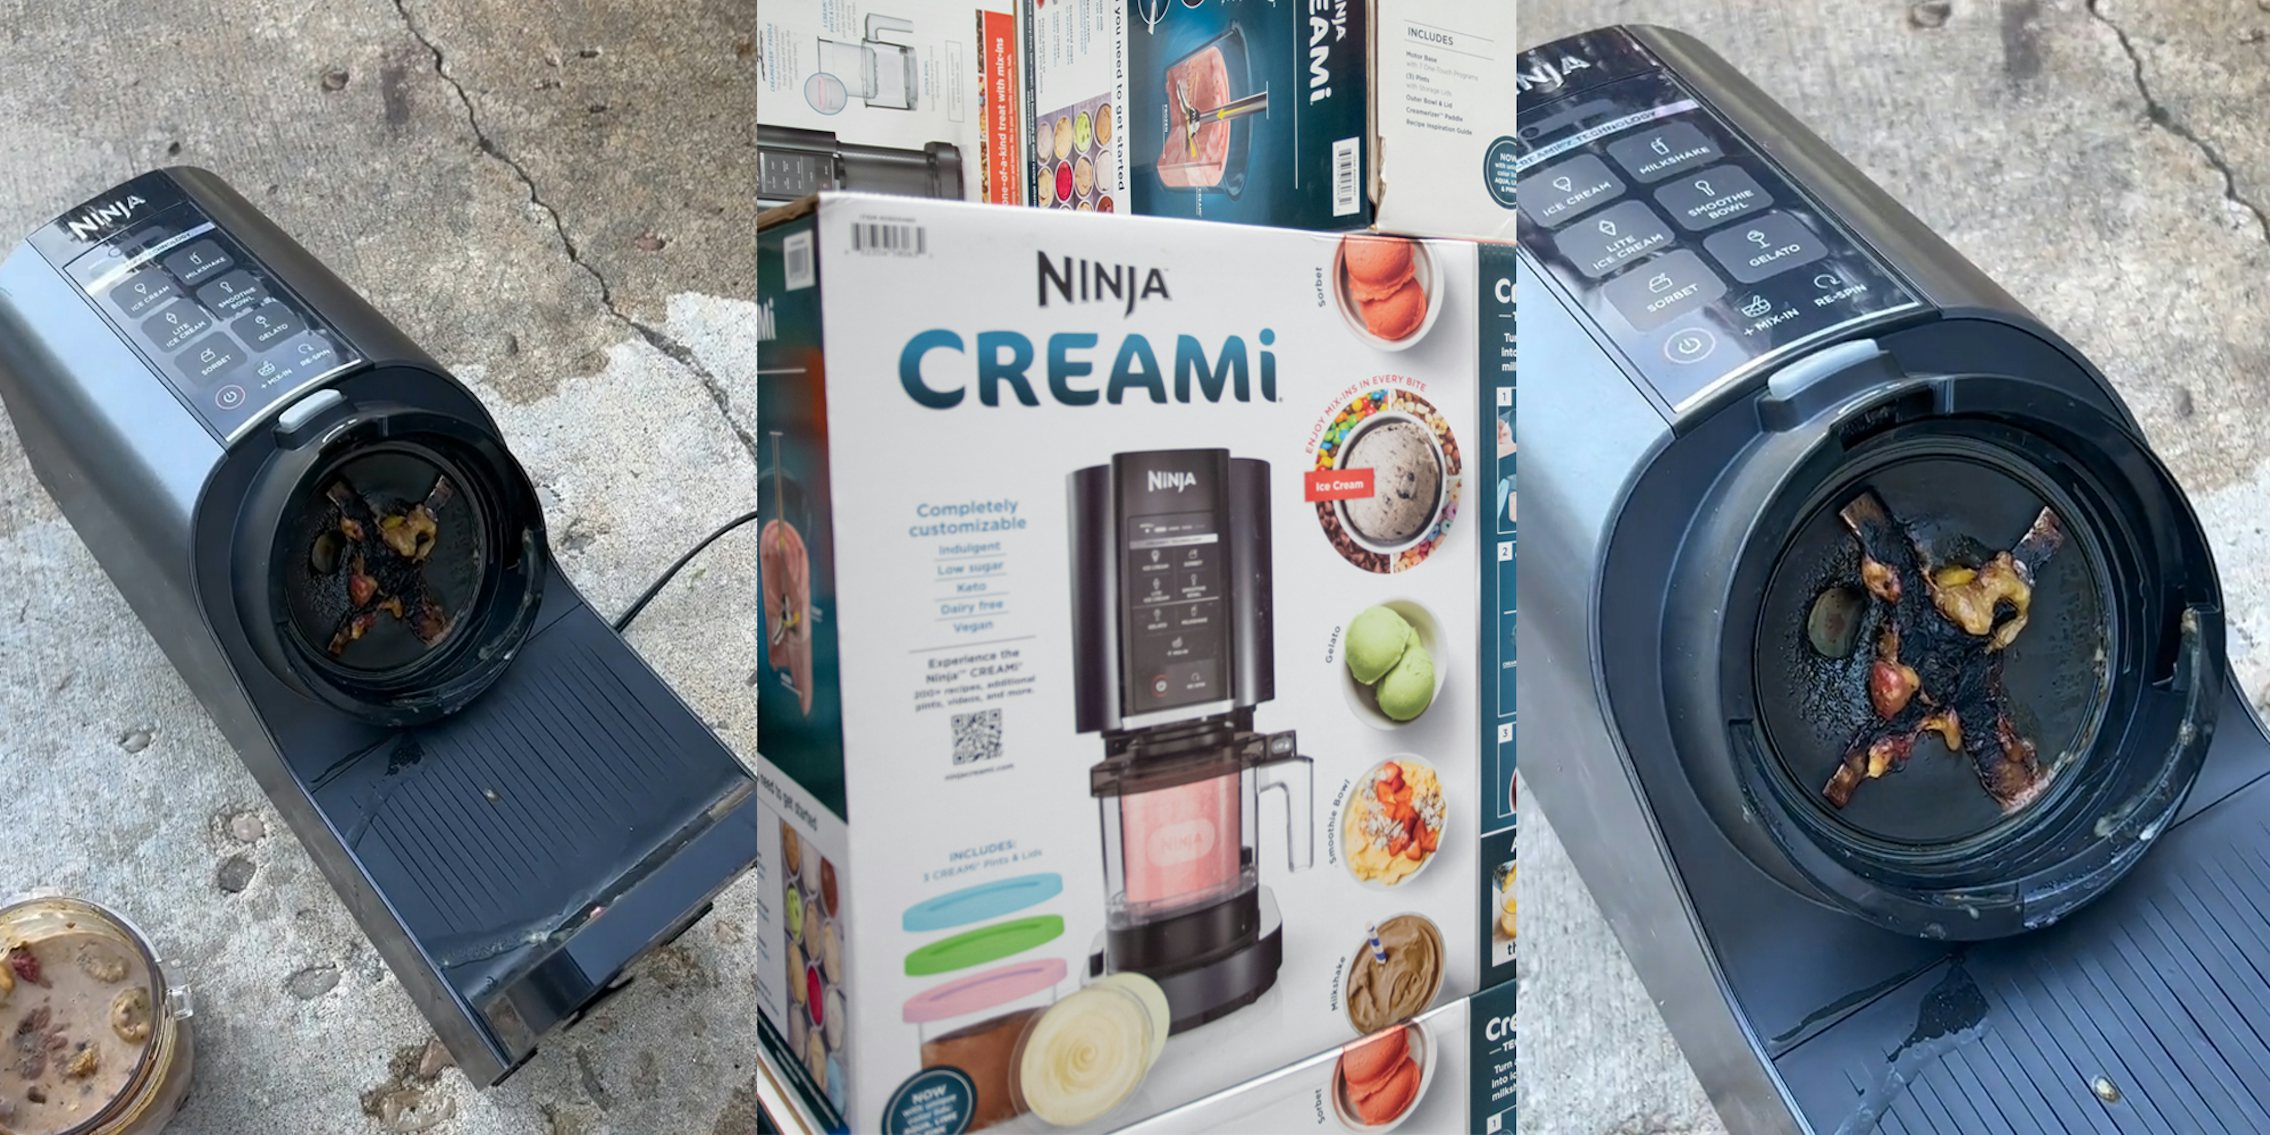 We Tested the Ninja Creami. The Ice Cream Tastes Great. But That Burning  Smell